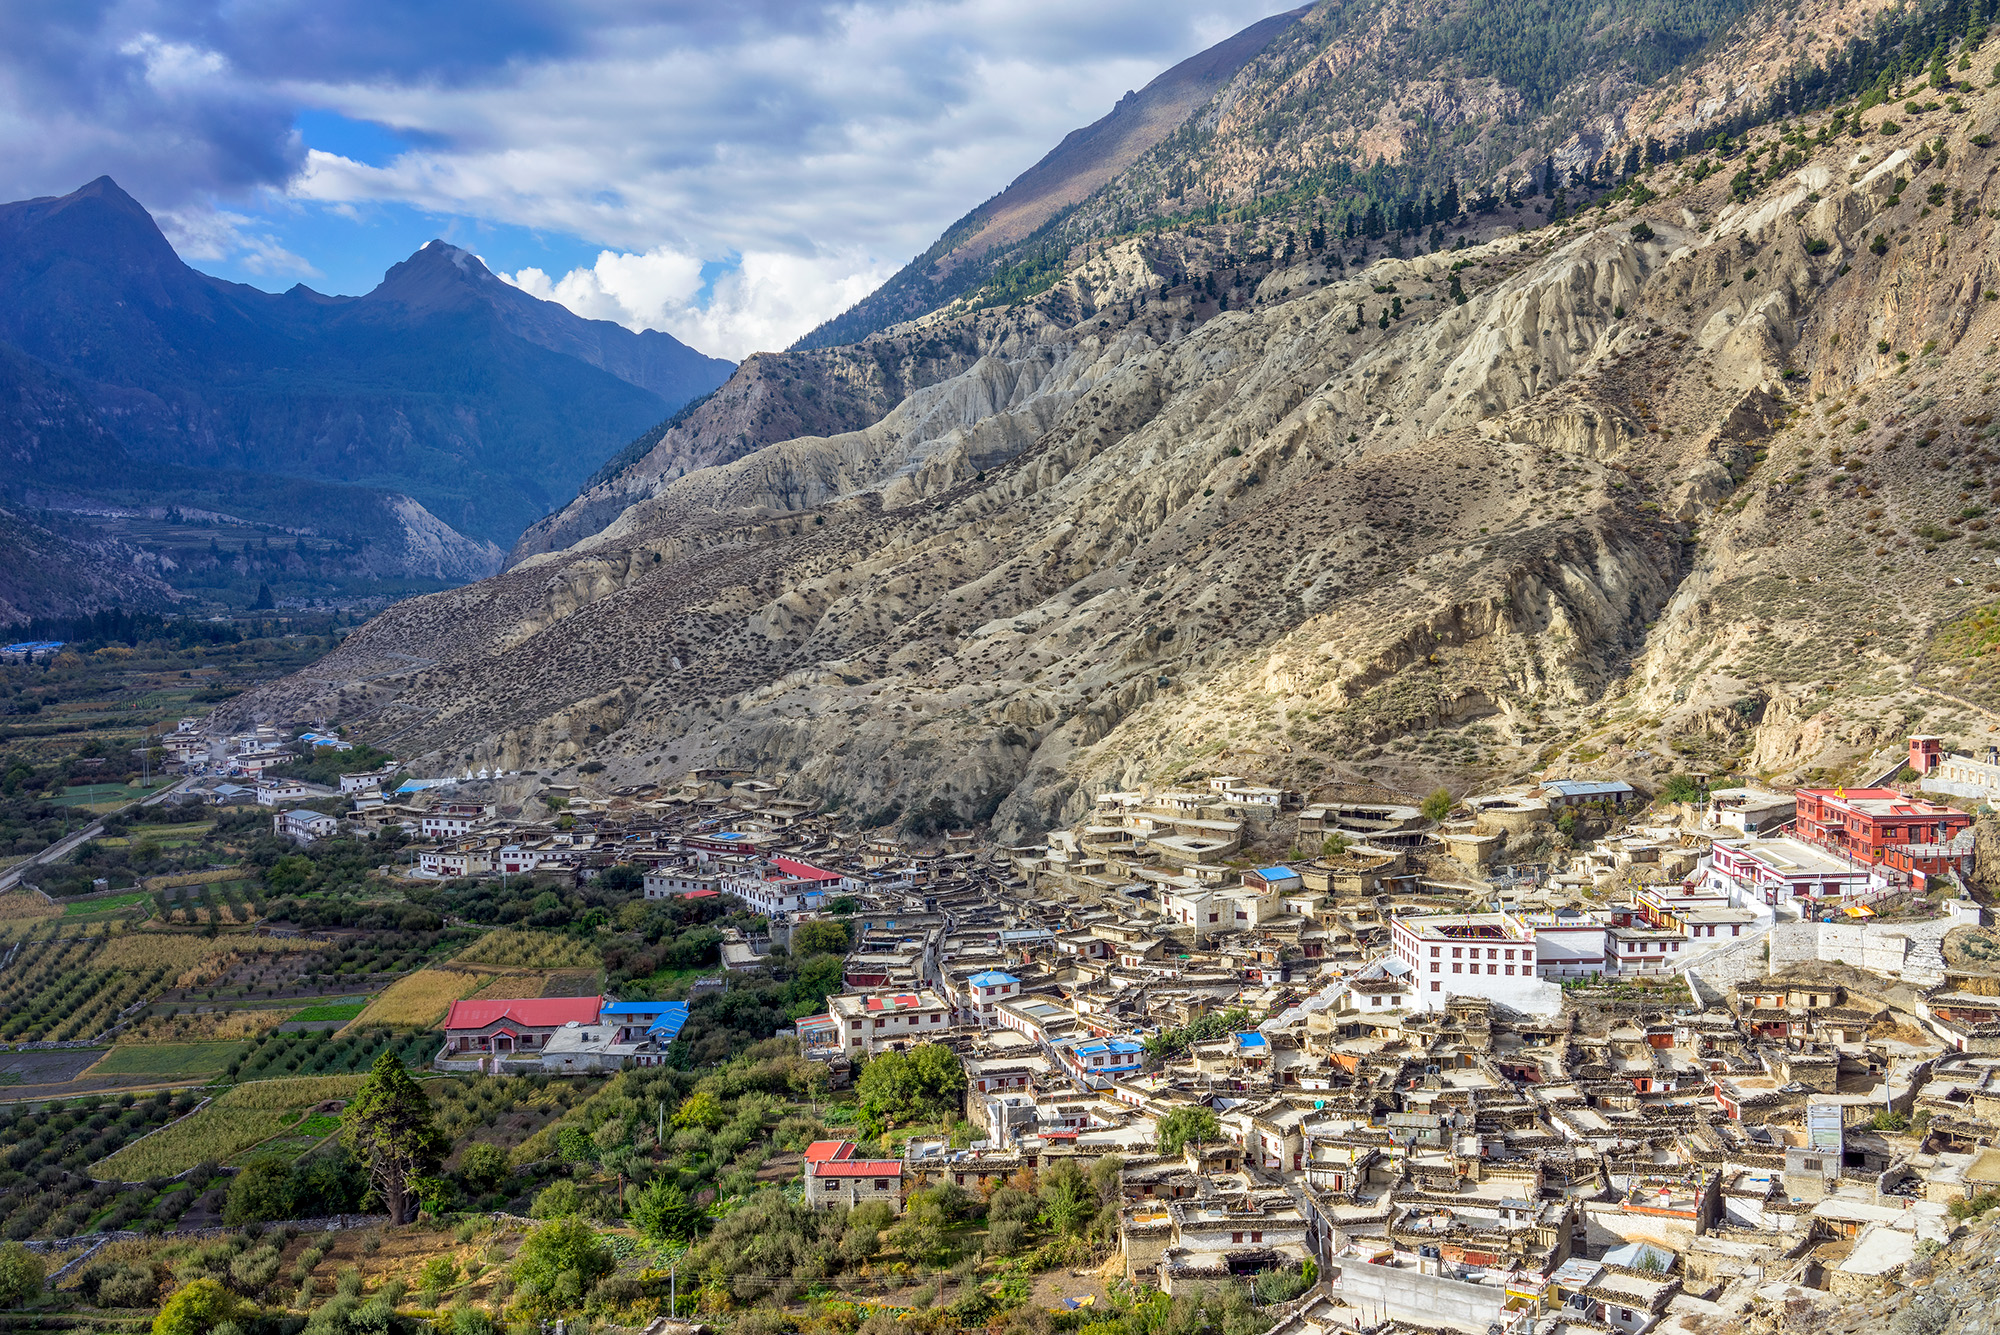 As the sun gracefully rises over the picturesque village of Marpha in Nepal, "Marpha's Morning Embrace" reveals a breathtaking...